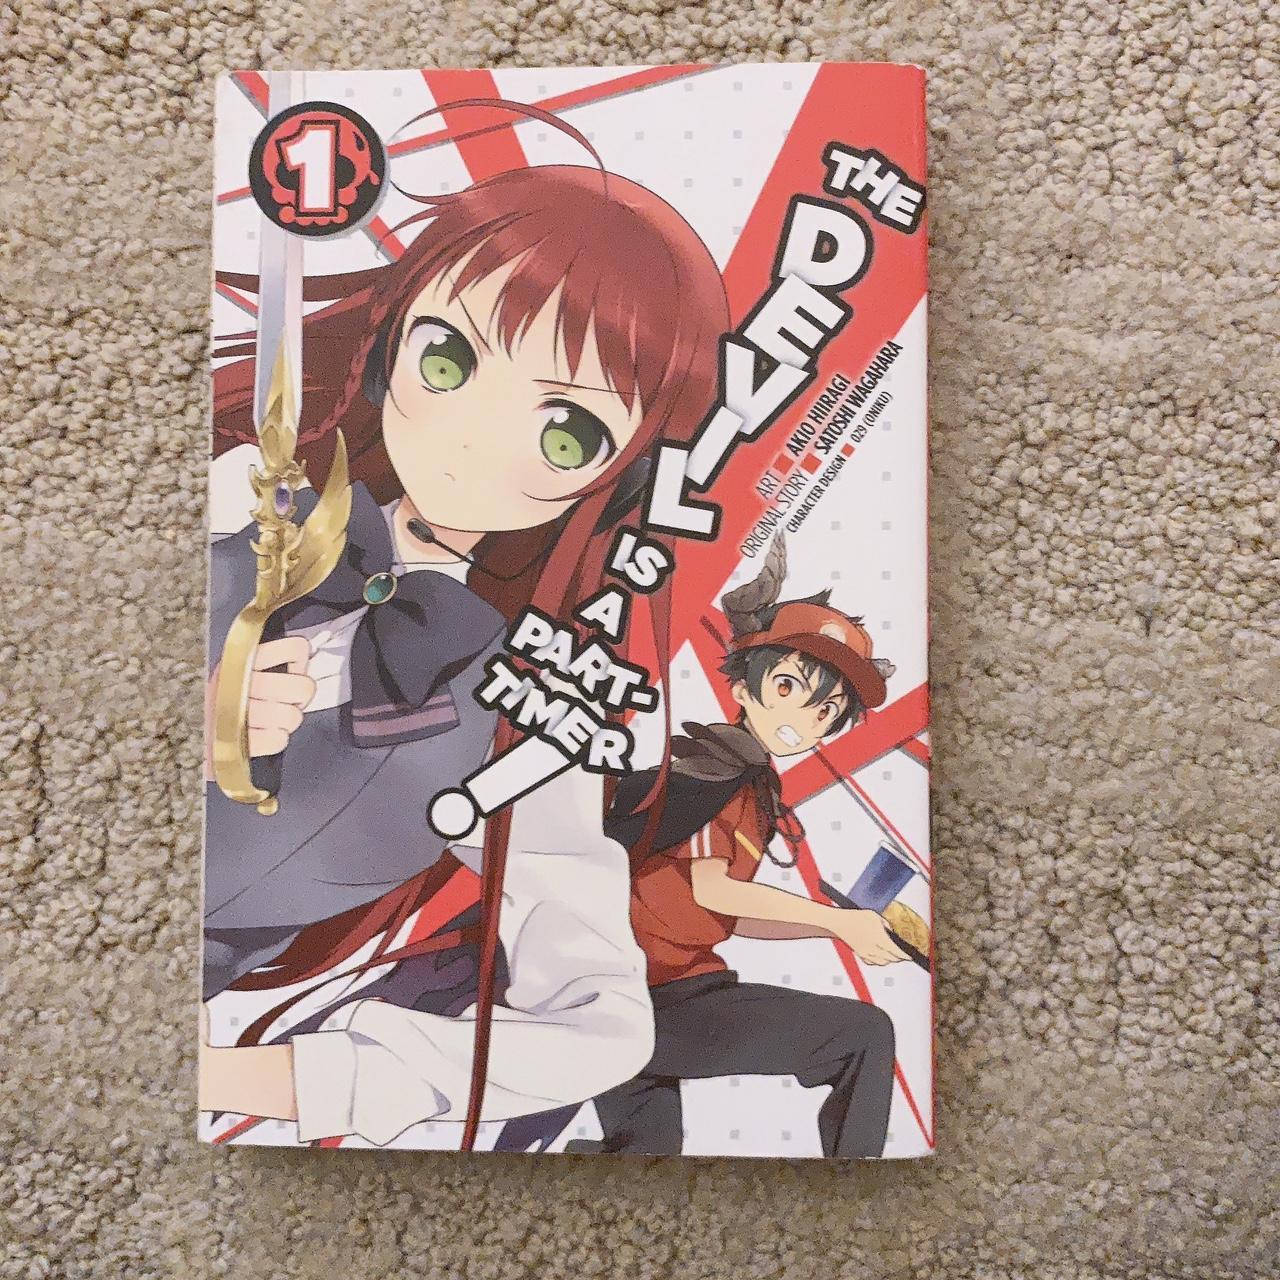 The Devil Is a Part-Timer Vol. 1 (The Devil Is a Part-Timer!) See more